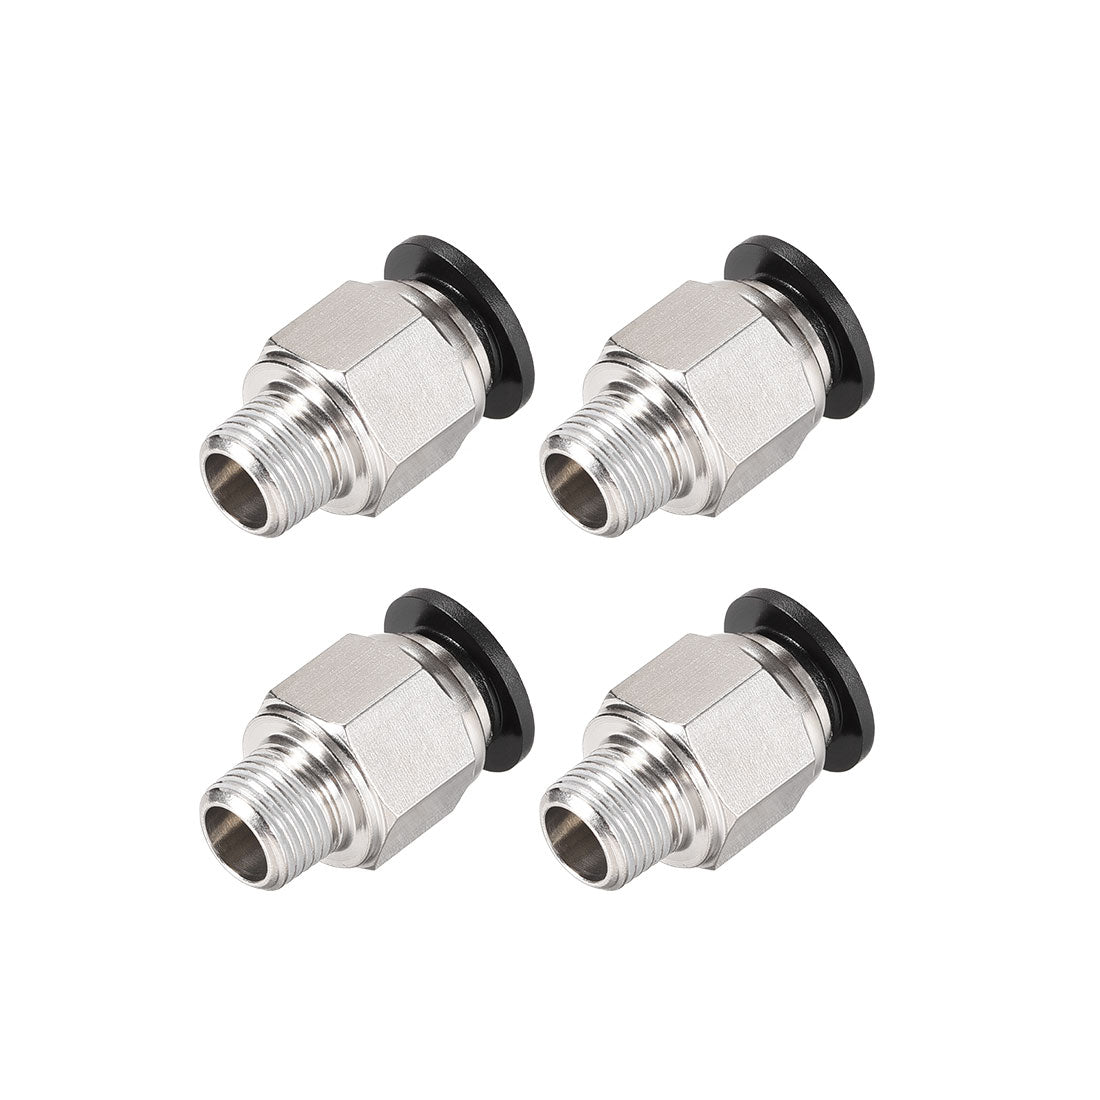 uxcell Uxcell Straight Pneumatic Push to Quick Connect Fittings 1/8NPT Male x 8mm Tube OD Silver Tone 4pcs